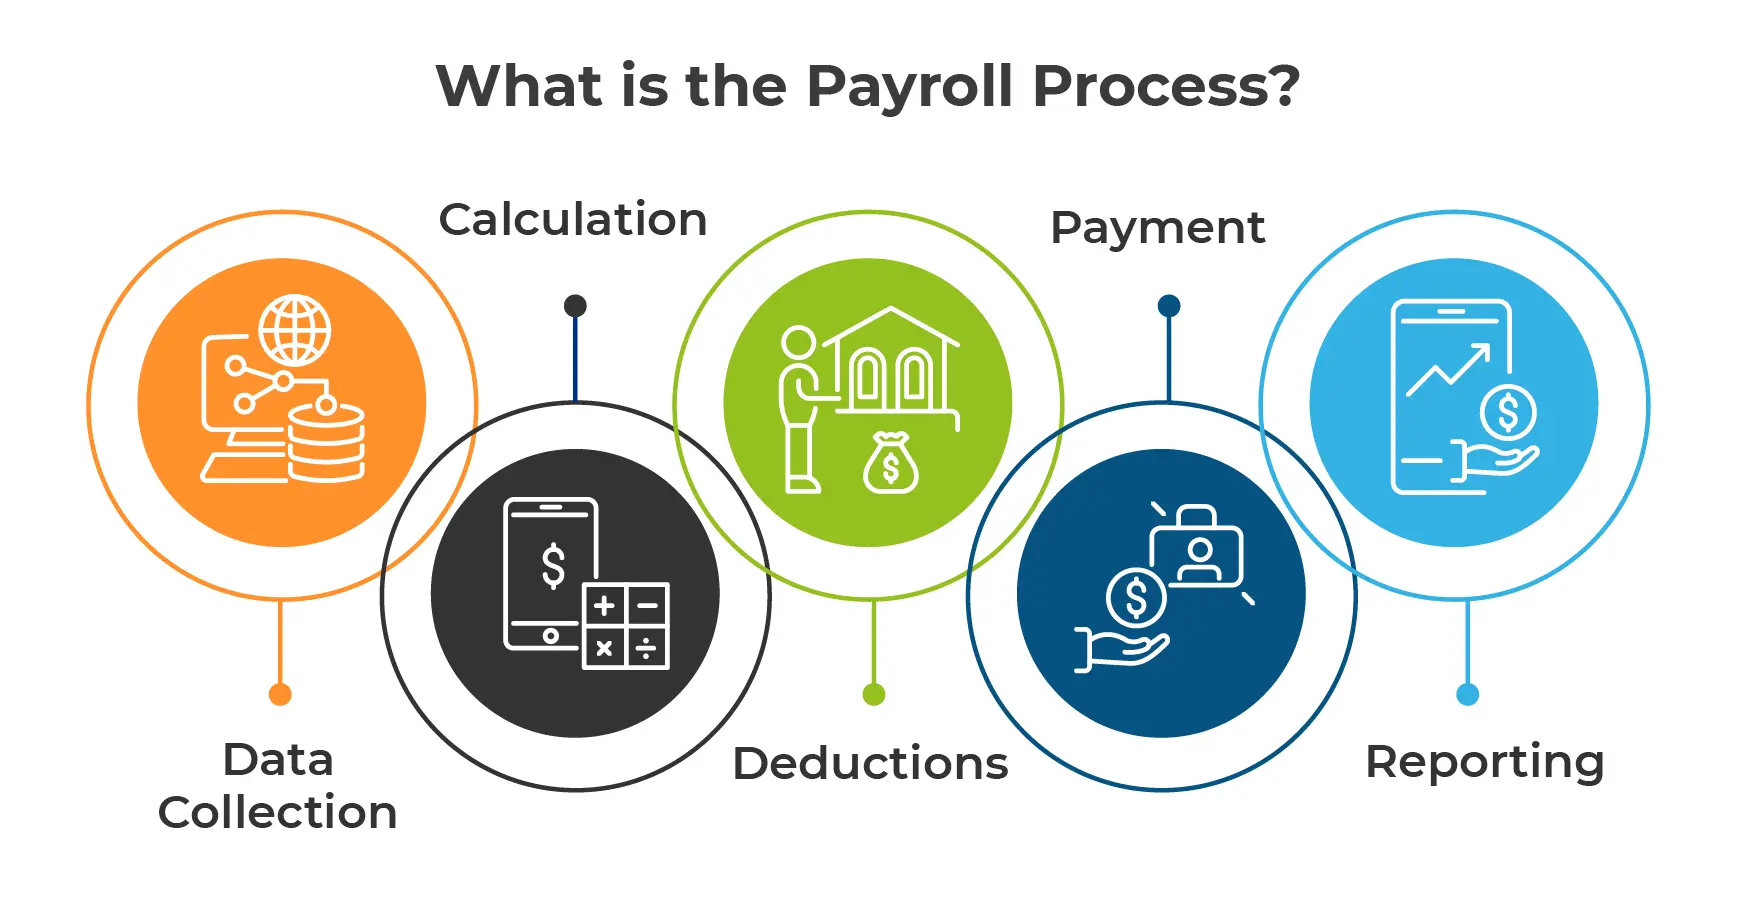 What is the Payroll Process?